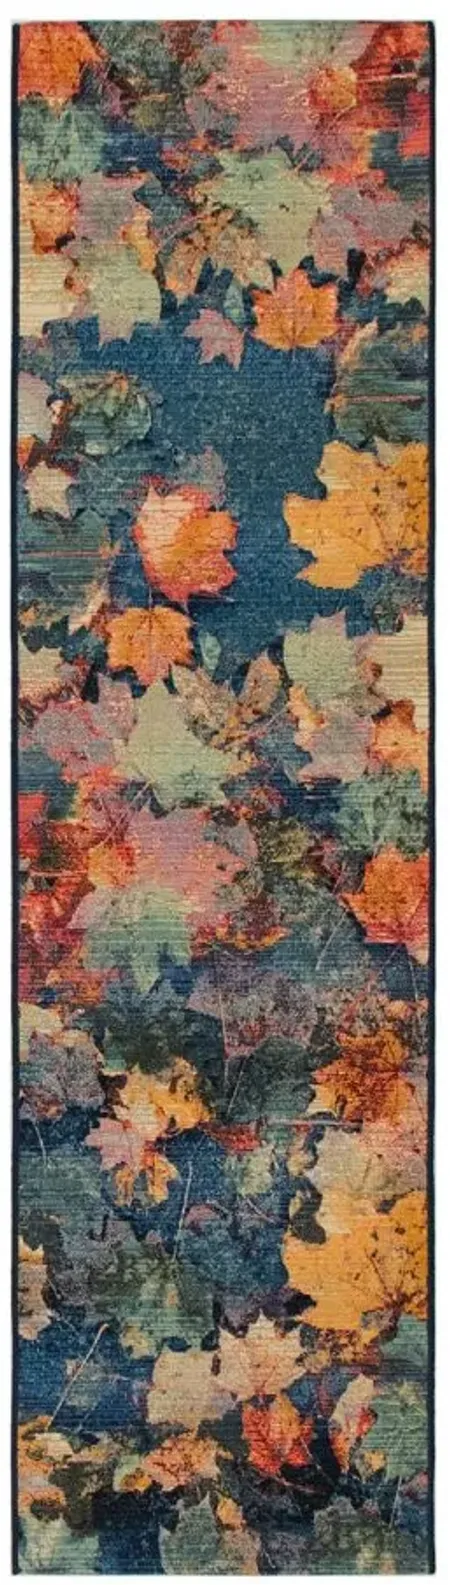 Liora Manne Marina Fall In Love Indoor/Outdoor Area Rug in Multi by Trans-Ocean Import Co Inc